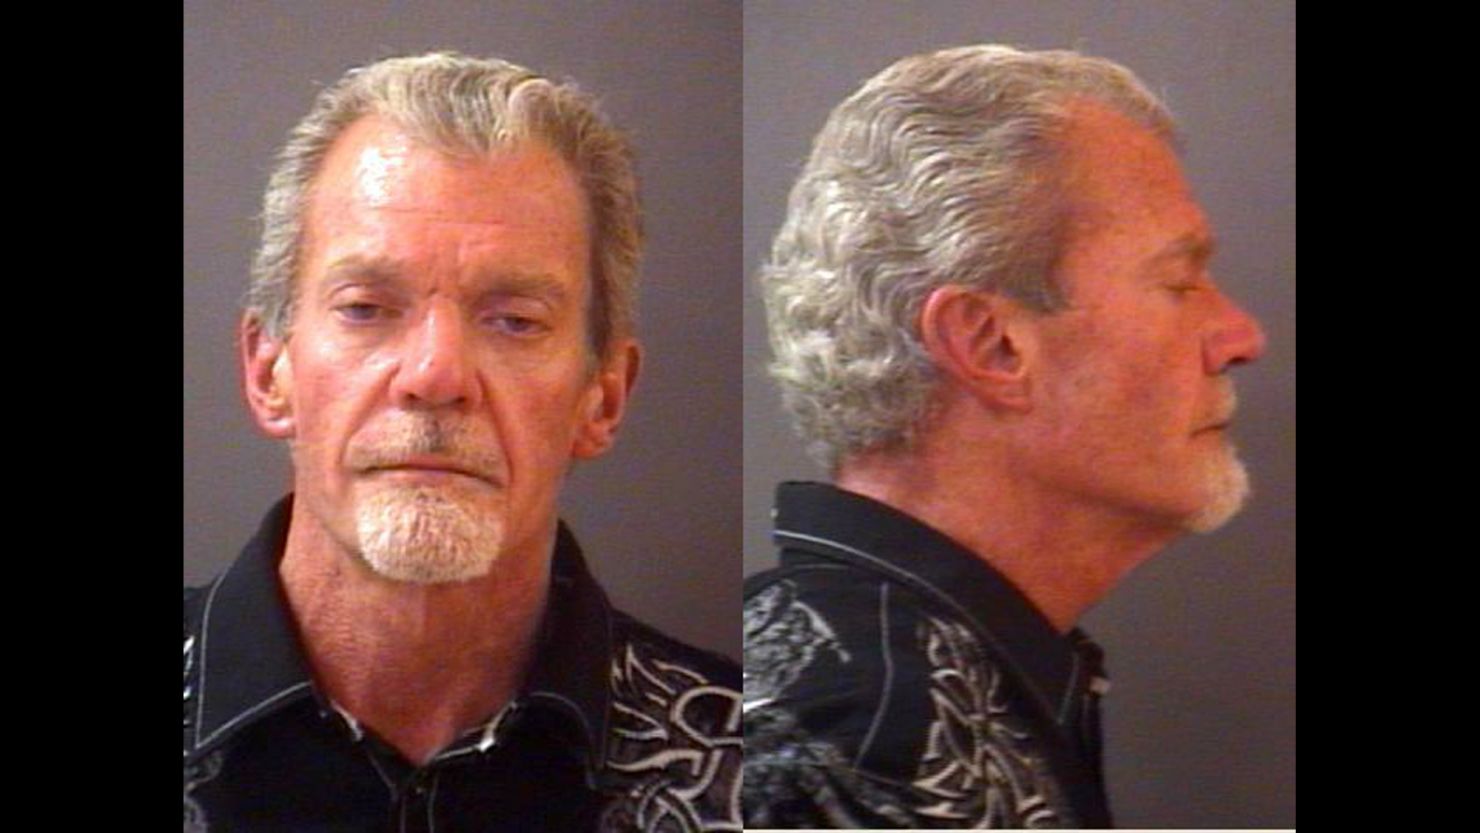 Indianapolis Colts owner Jim Irsay, shown here in his police booking photo from March 16, 2014.